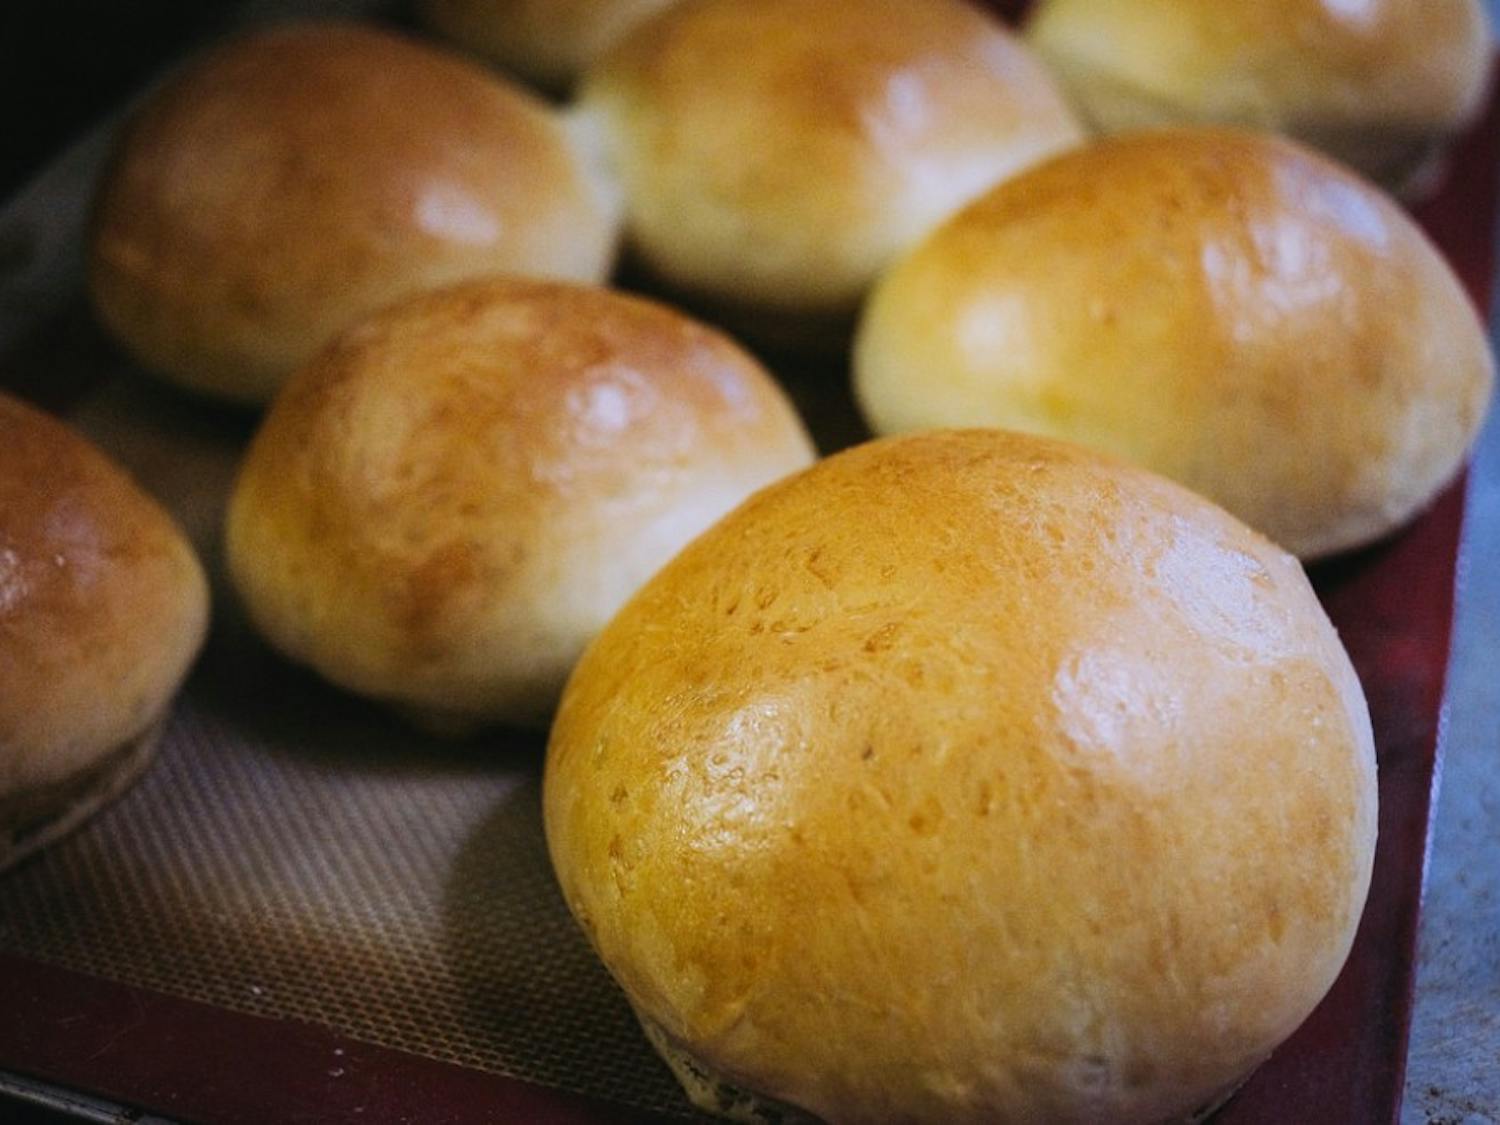 Yeast dinner rolls often accompany any Thanksgiving meals.